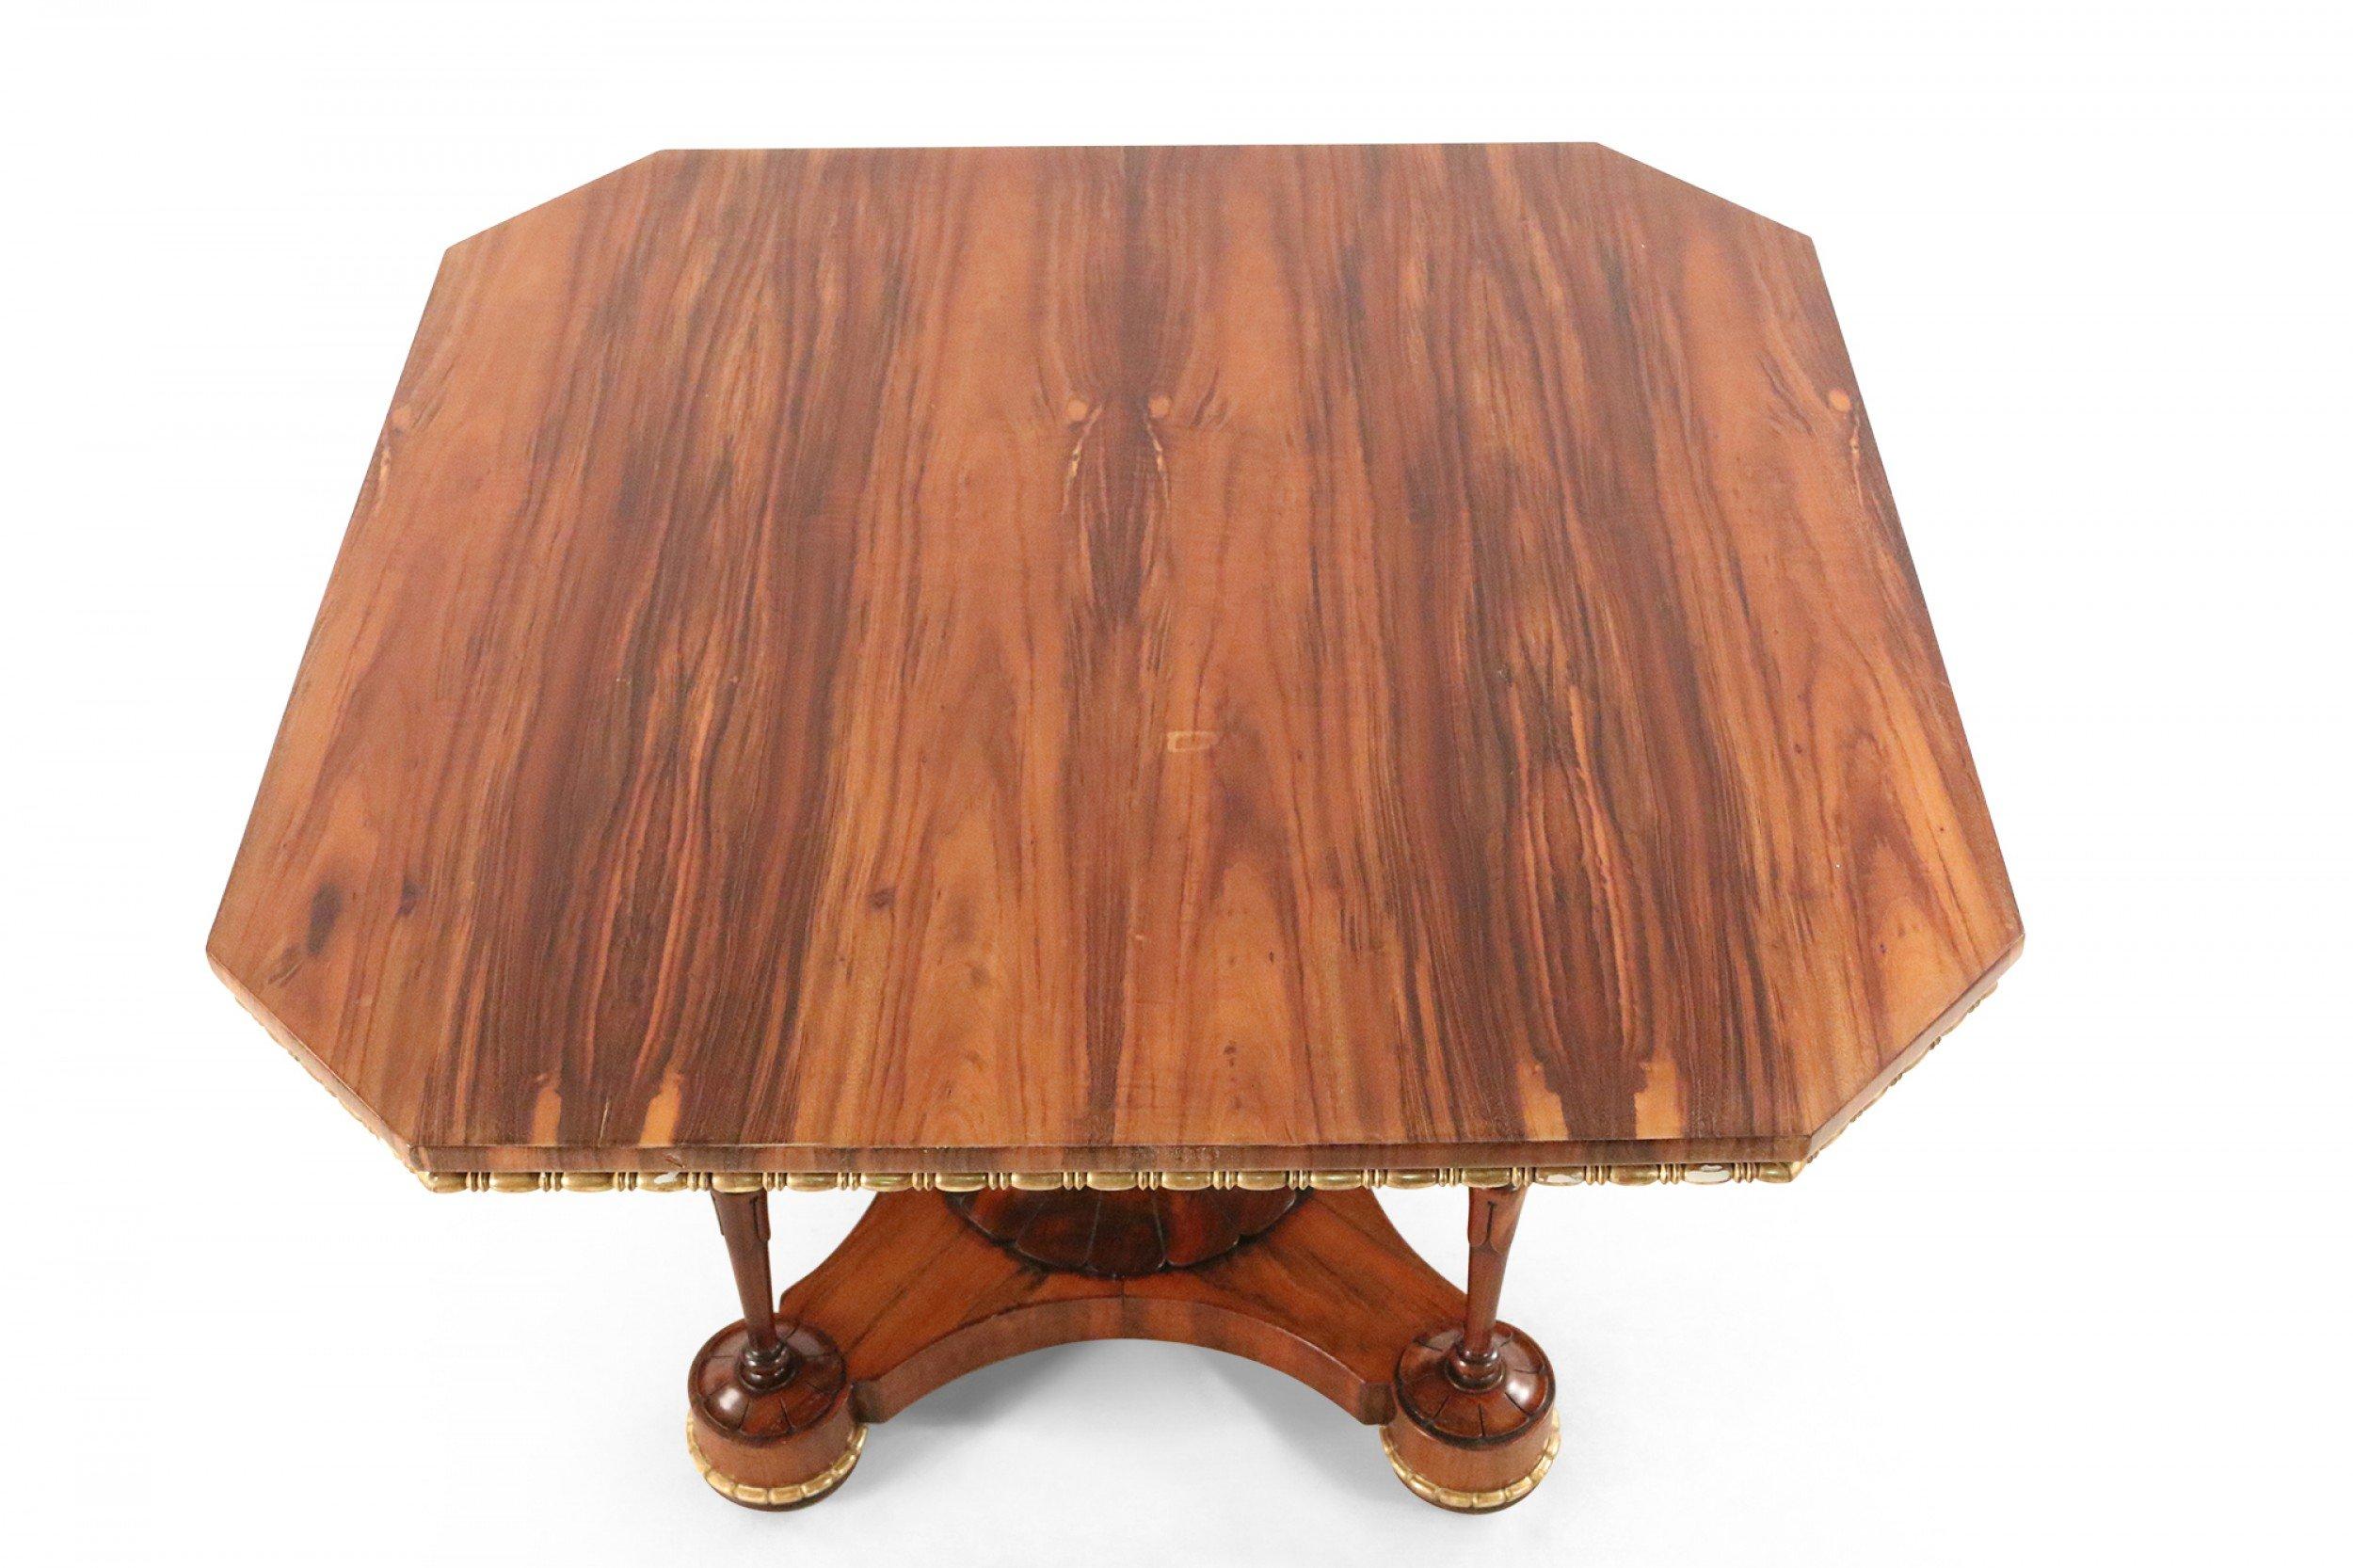 Wood English Regency Square Canted Corner Walnut and Brass Trim Center Table For Sale